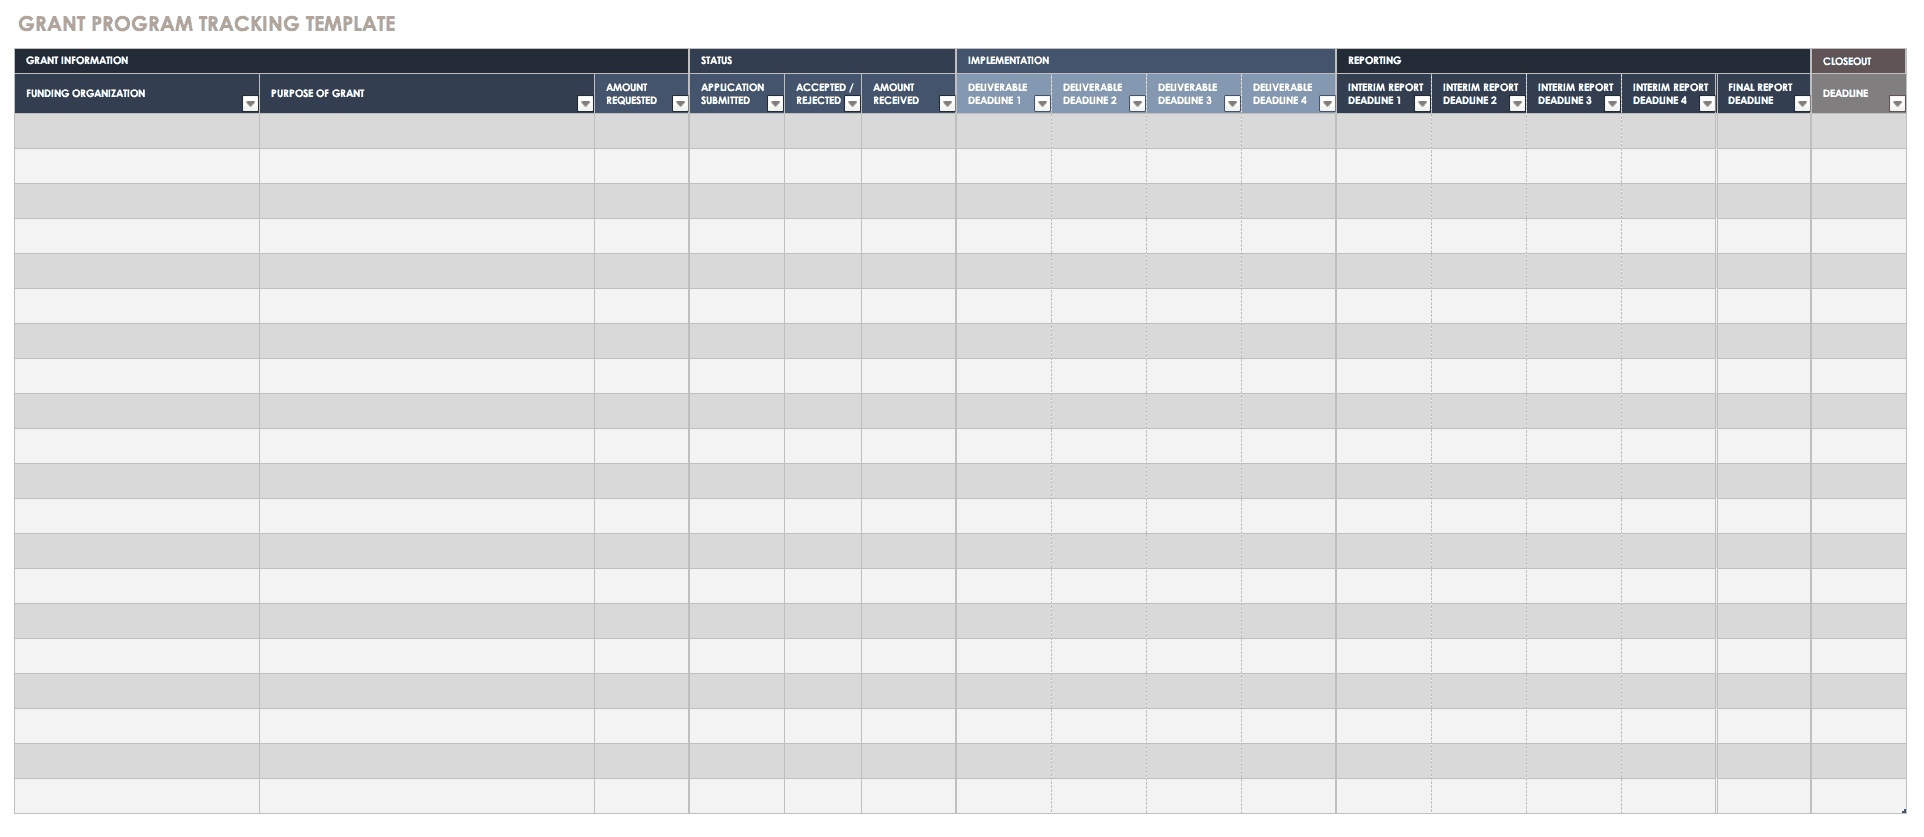 grant-tracking-spreadsheet-template